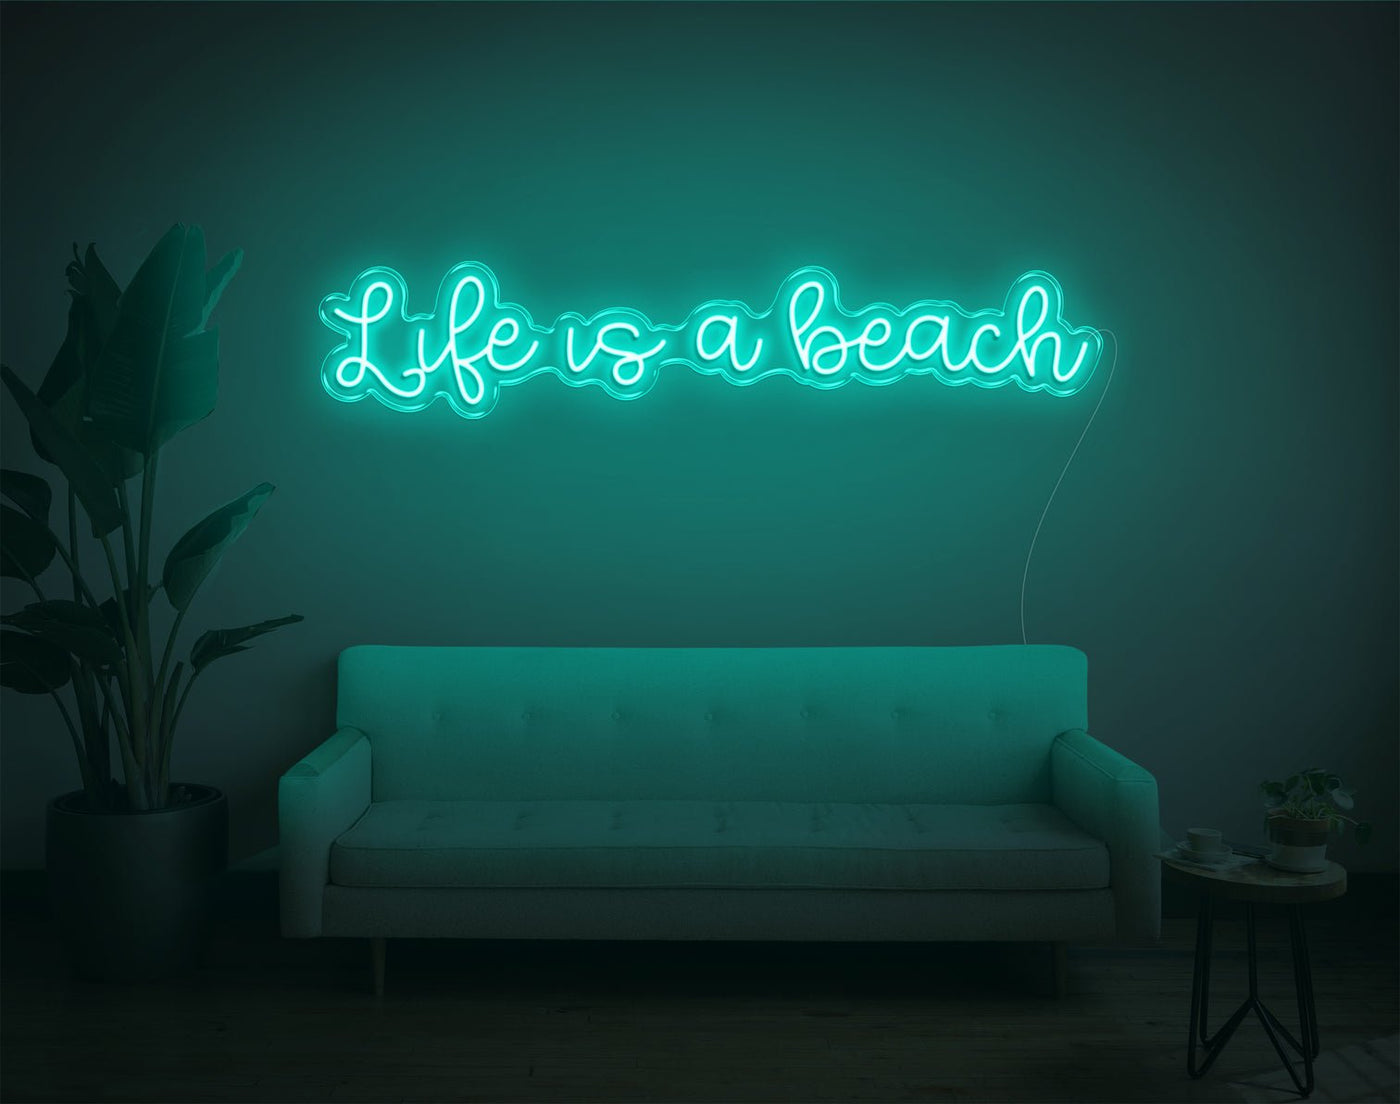 Life is a beach LED Neon Sign - 28inch x 7inchTurquoise